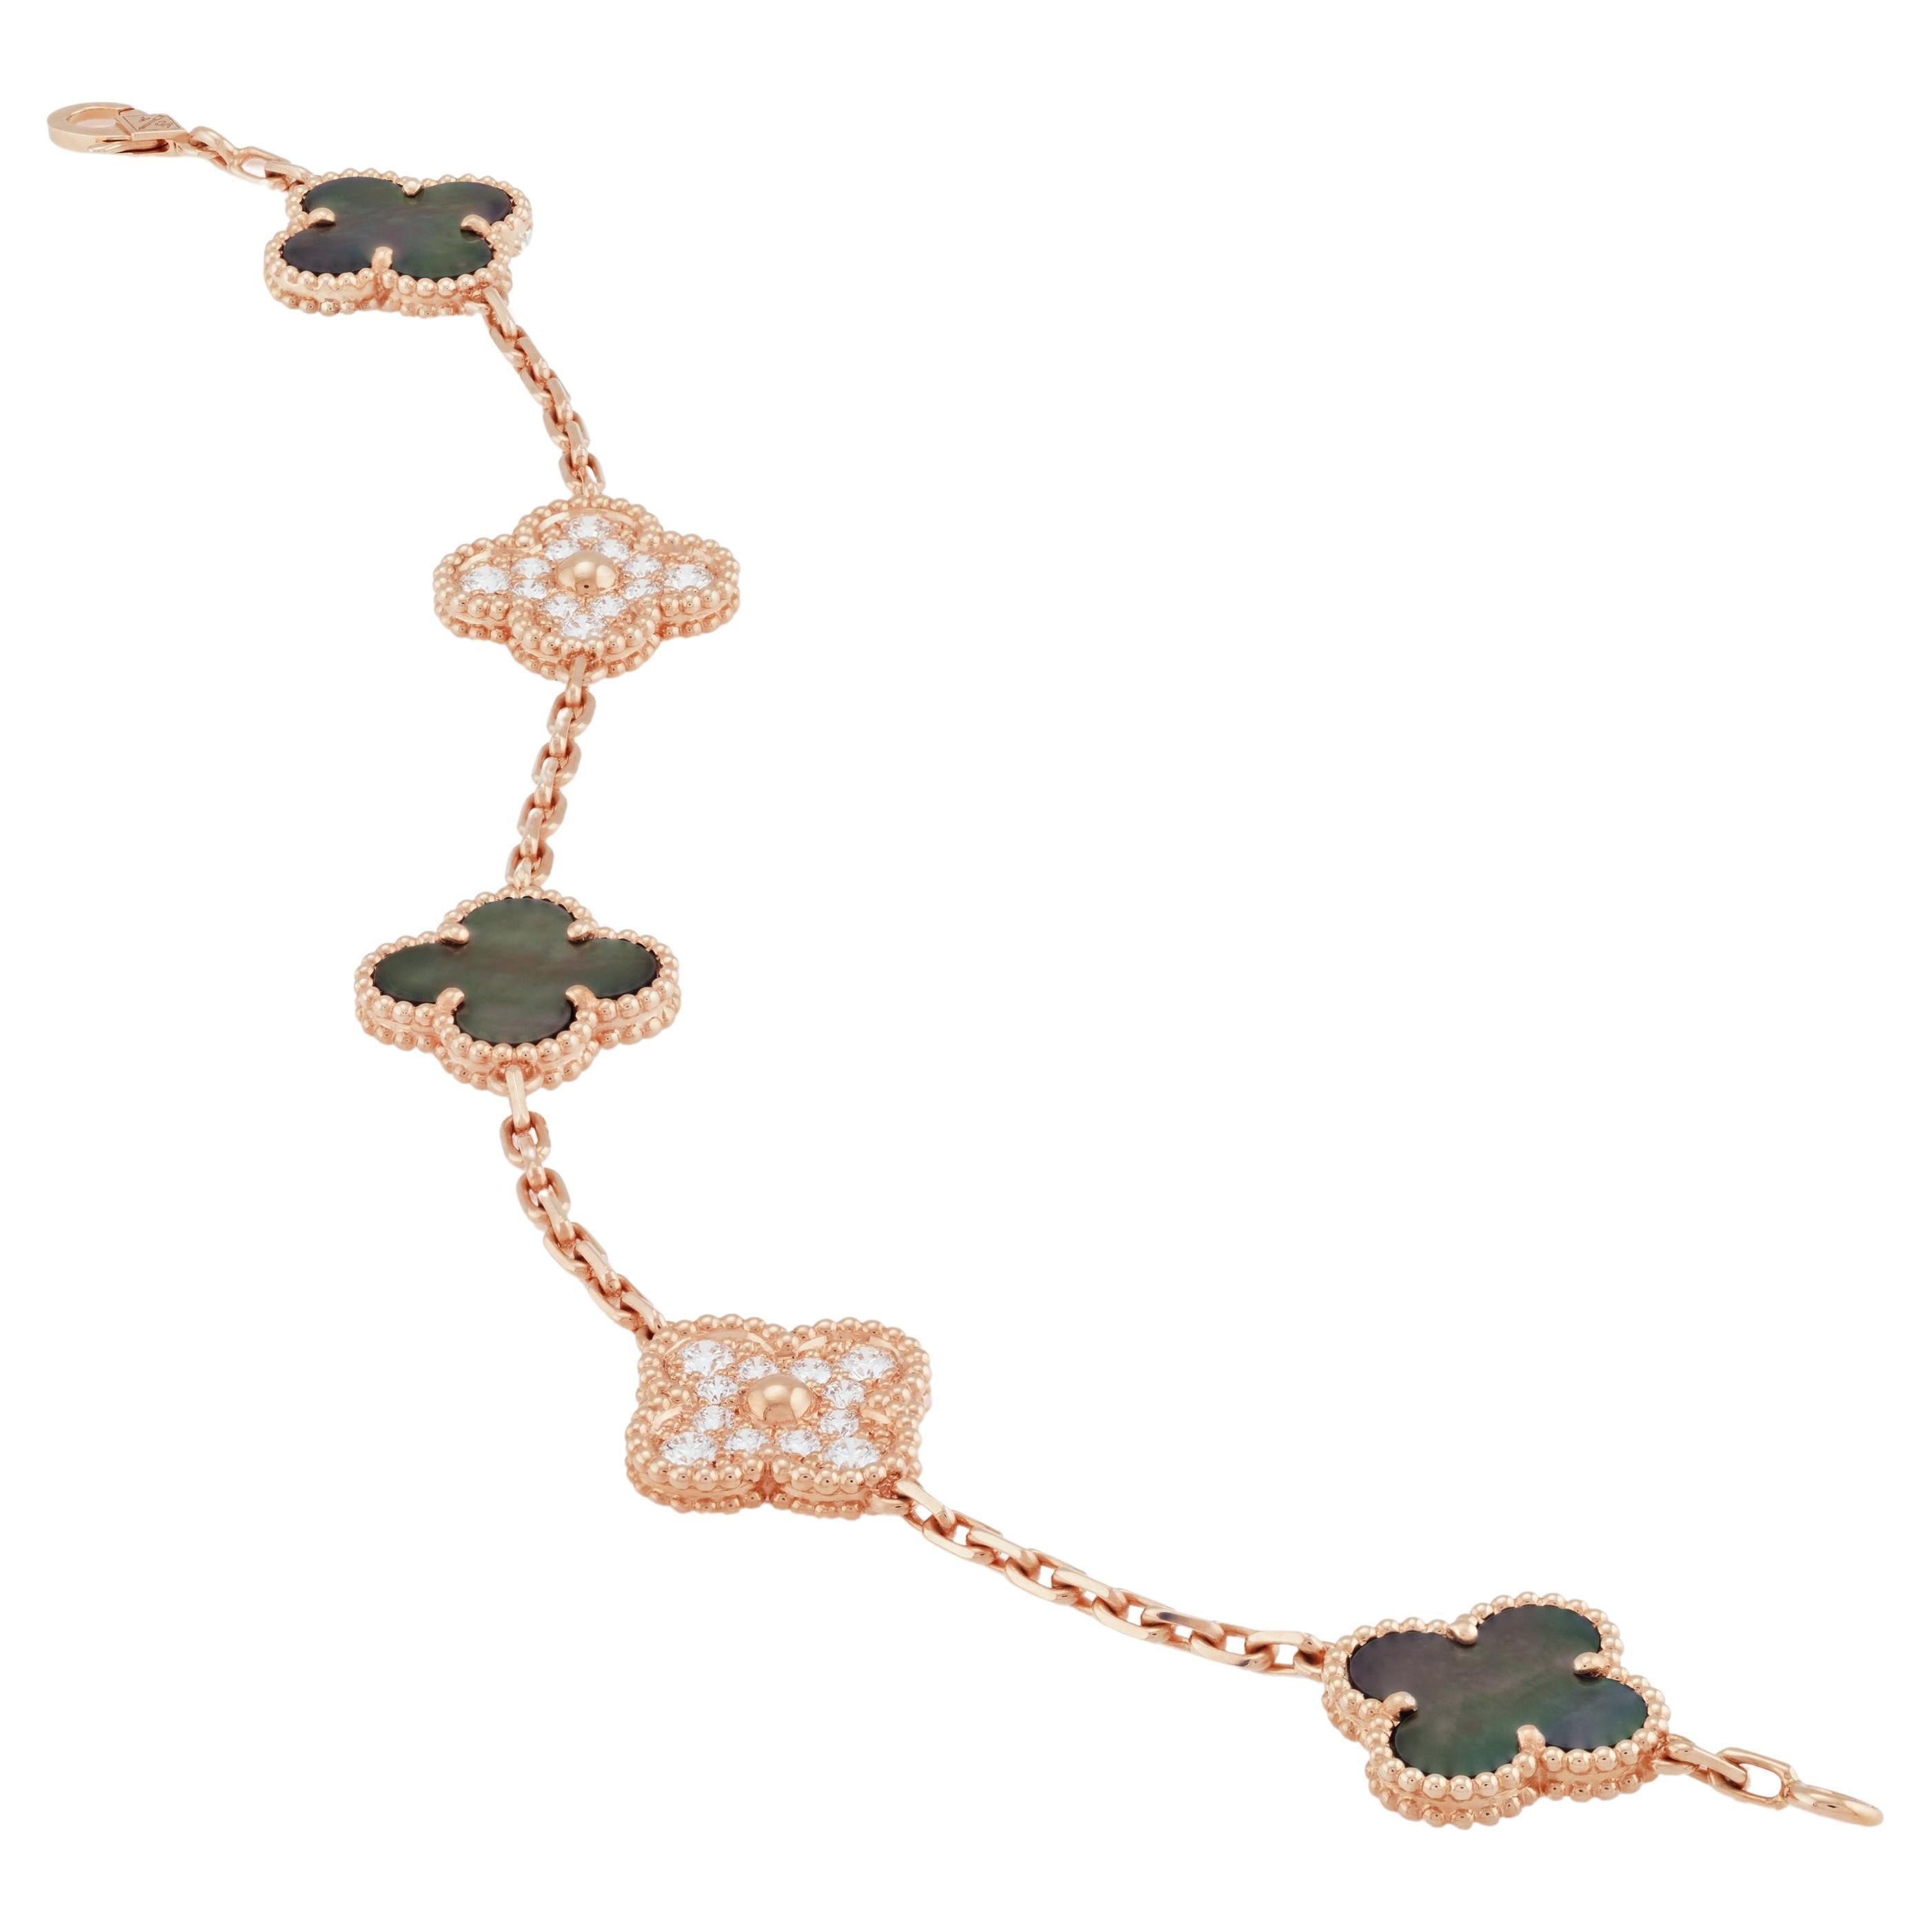 Van Cleef & Arpels Alhambra 5 motif Bracelet 18k Rose Gold diamonds & motherofpearl 
The bracelet is made in 18k rose gold and set with white diamonds that are D to F color and VS clarity. with 24 pave-set diamonds weighing approximately 1ct total